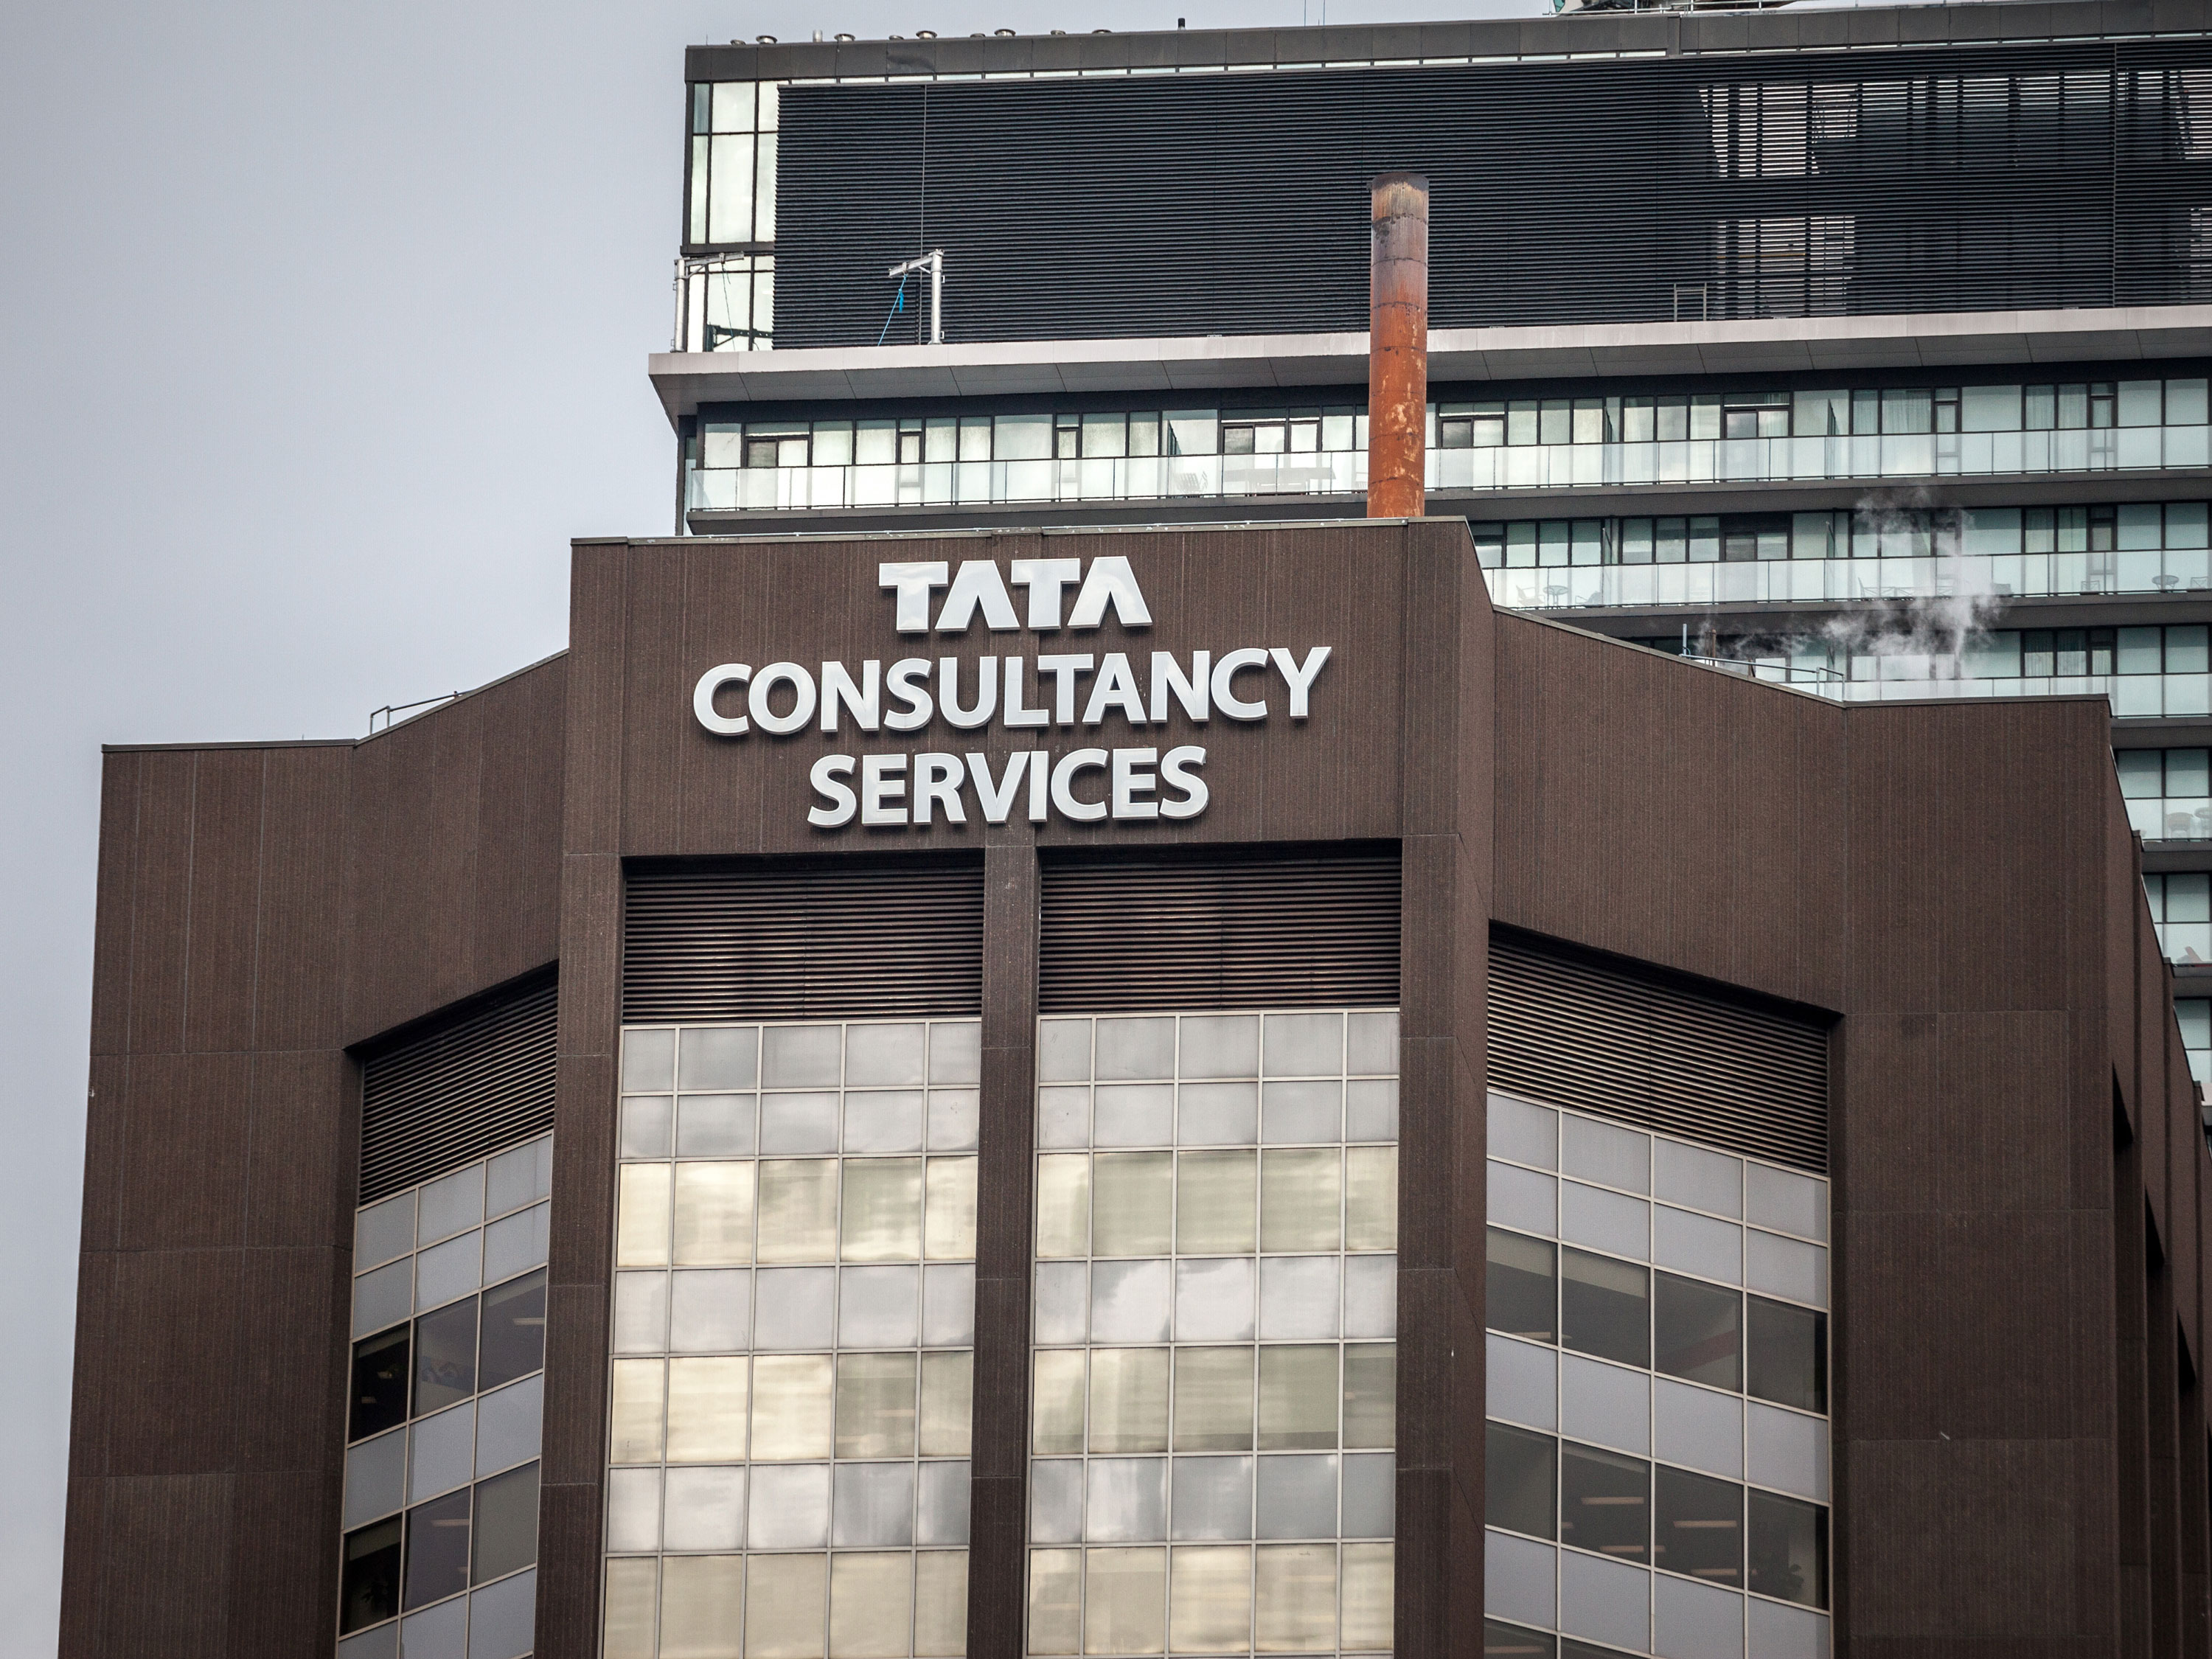 Among the gainers, Tata Consultancy Services climbed 2.83%, Tata Motors jumped 2.55%, Tata Coffee rose 0.98%, Tata Global Beverages 0.67%, Tata Steel 0.48%, Tata Metaliks gained marginally 0.17%, Titan Company 0.07% and Tata Communications 0.01% on the BSE. 